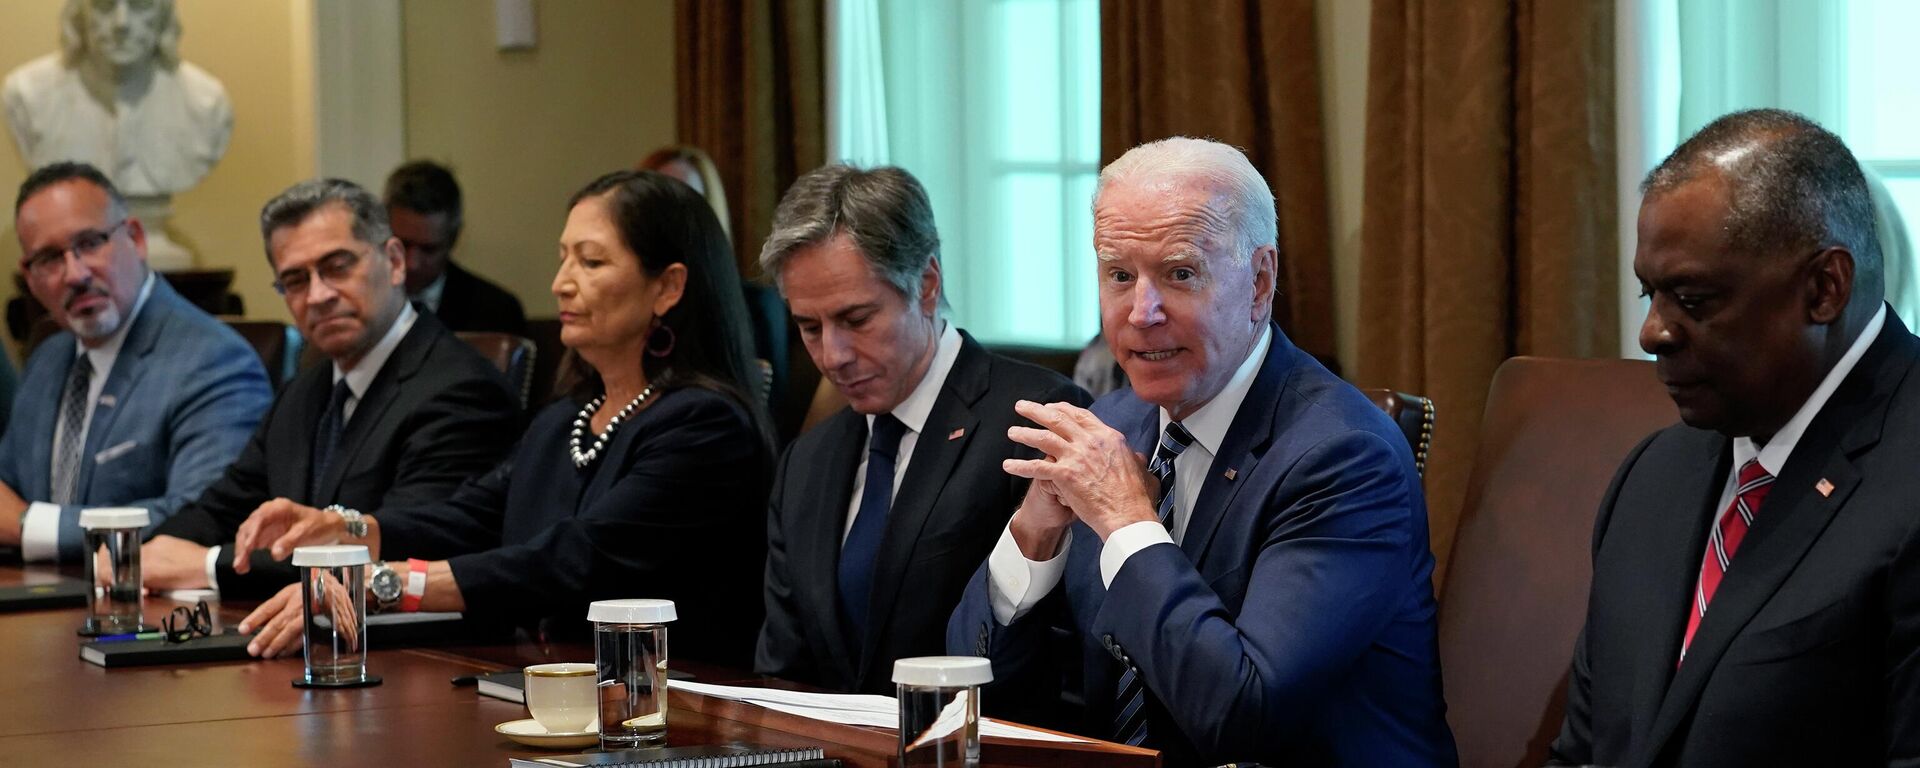 President Joe Biden speaks during a meeting with his Cabinet in the Cabinet Room at the White House in Washington, Tuesday, July 20, 2021. From left, Secretary of Education Miguel Cardona, Secretary of Health and Human Services Xavier Becerra, Secretary of the Interior Deb Haaland, Secretary of State Antony Blinken, Biden and Secretary of Defense Lloyd Austin. (AP Photo/Susan Walsh) - Sputnik International, 1920, 14.08.2023